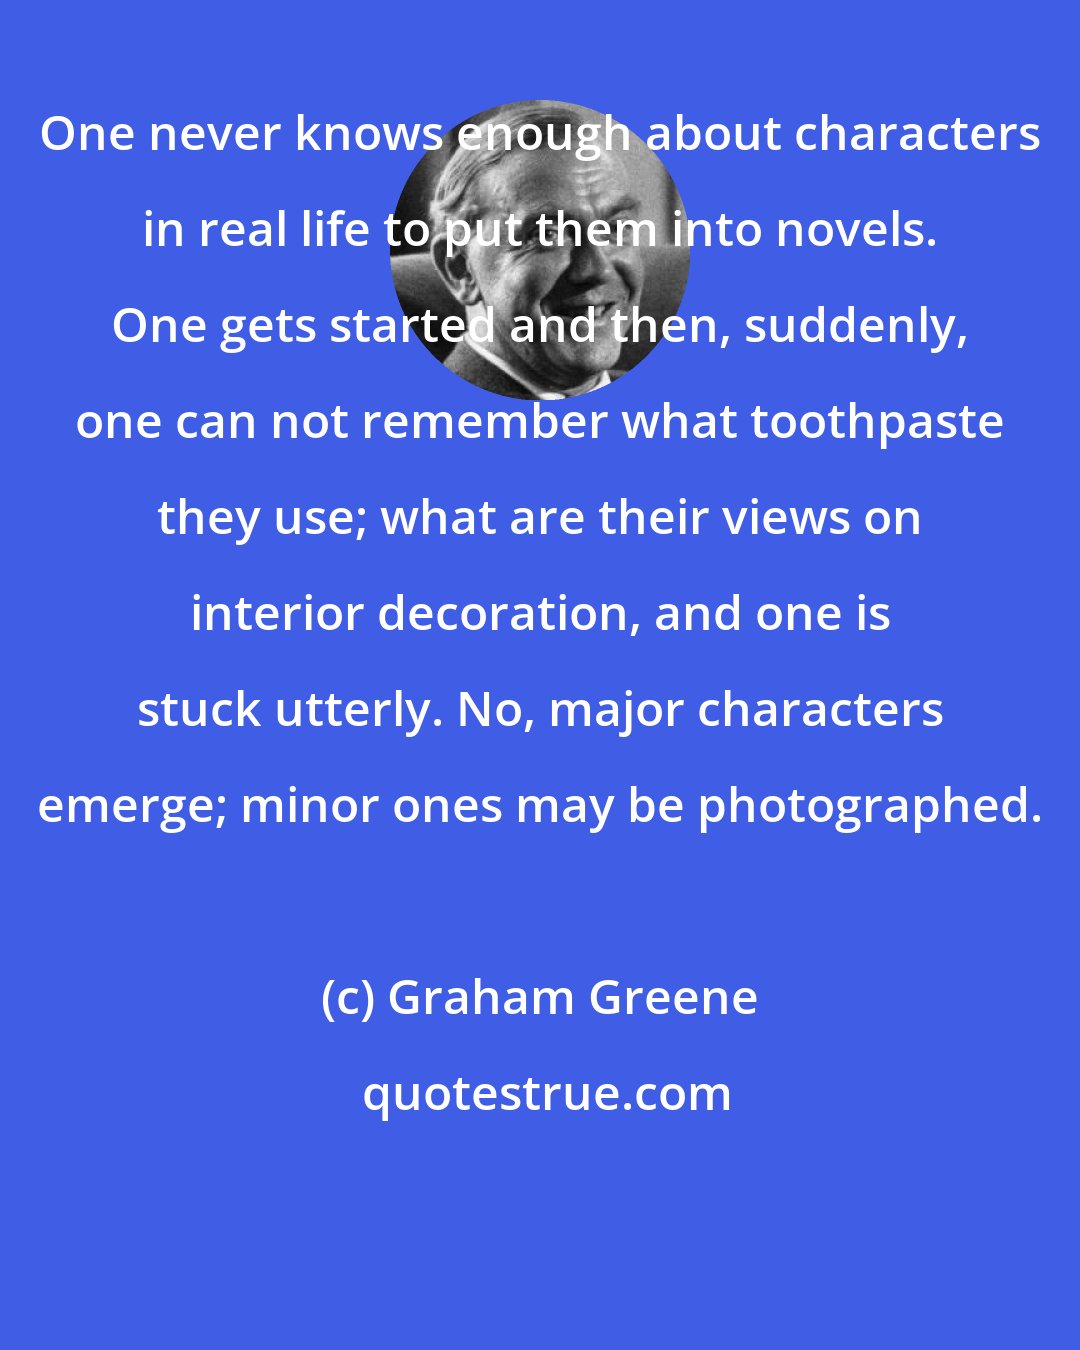 Graham Greene: One never knows enough about characters in real life to put them into novels. One gets started and then, suddenly, one can not remember what toothpaste they use; what are their views on interior decoration, and one is stuck utterly. No, major characters emerge; minor ones may be photographed.